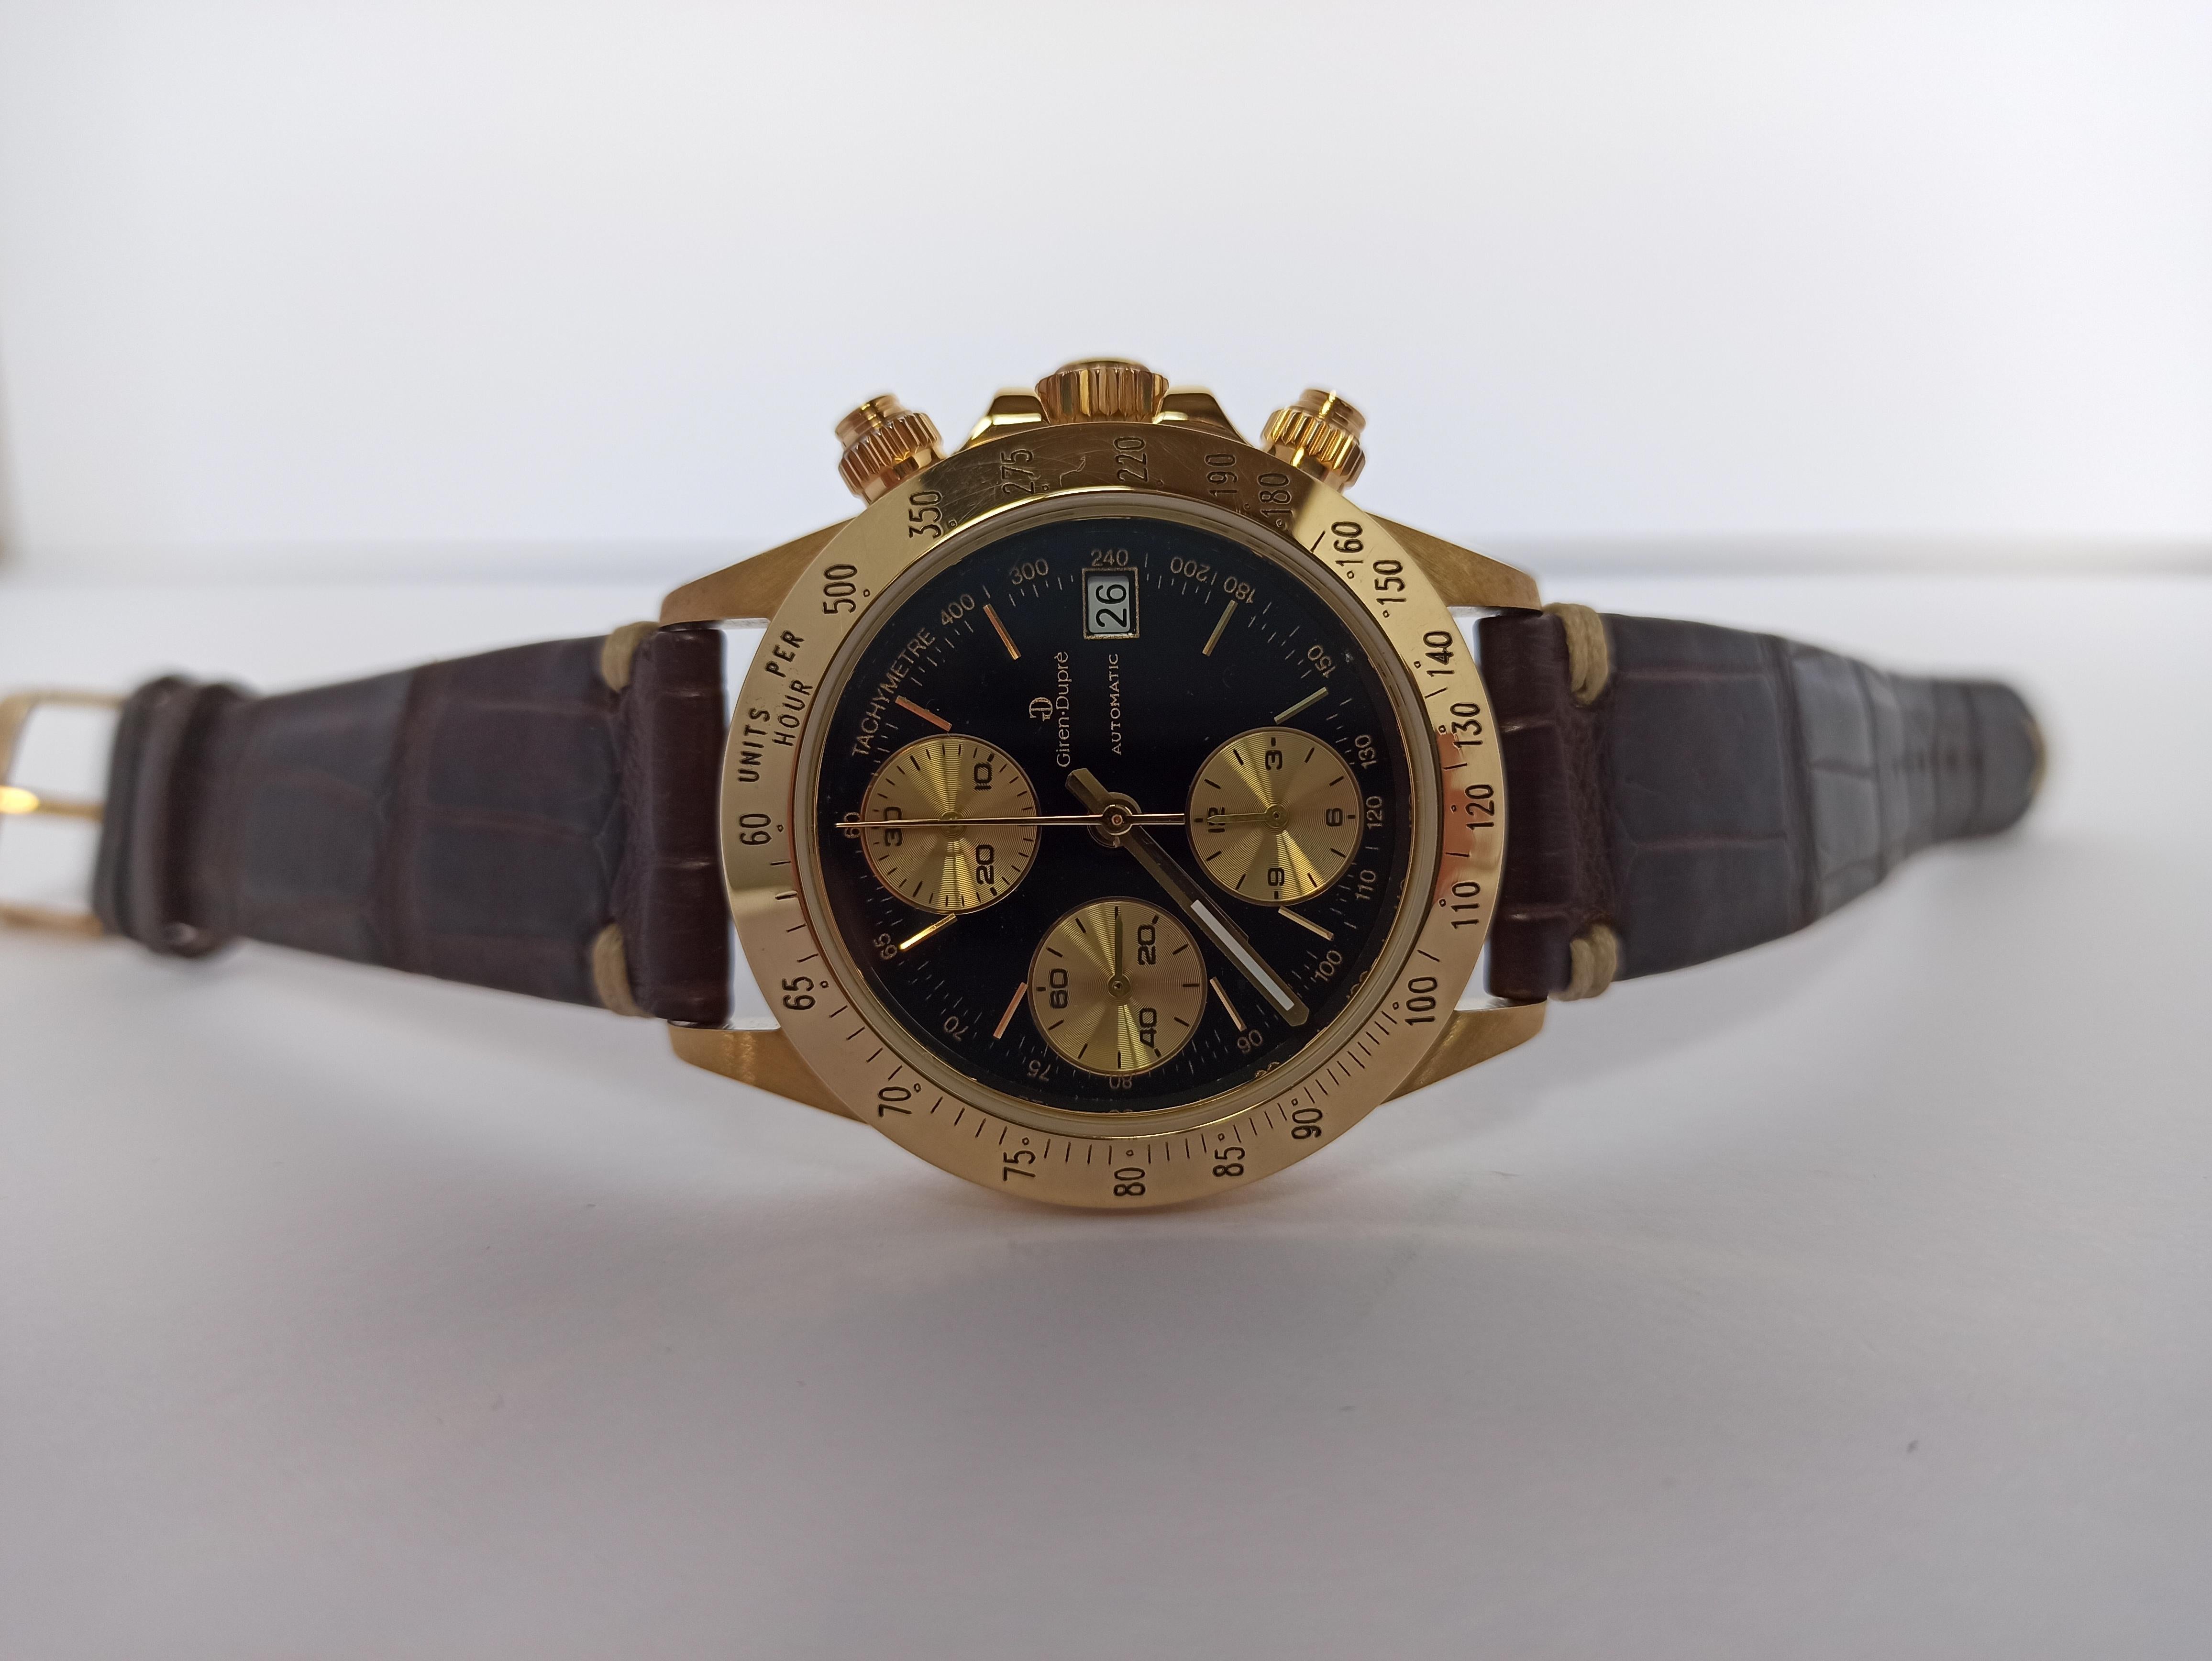 Giren Dupre' 18kt Solid Gold Daytona Style Chronograph, Leather Strap, Automatic For Sale 1